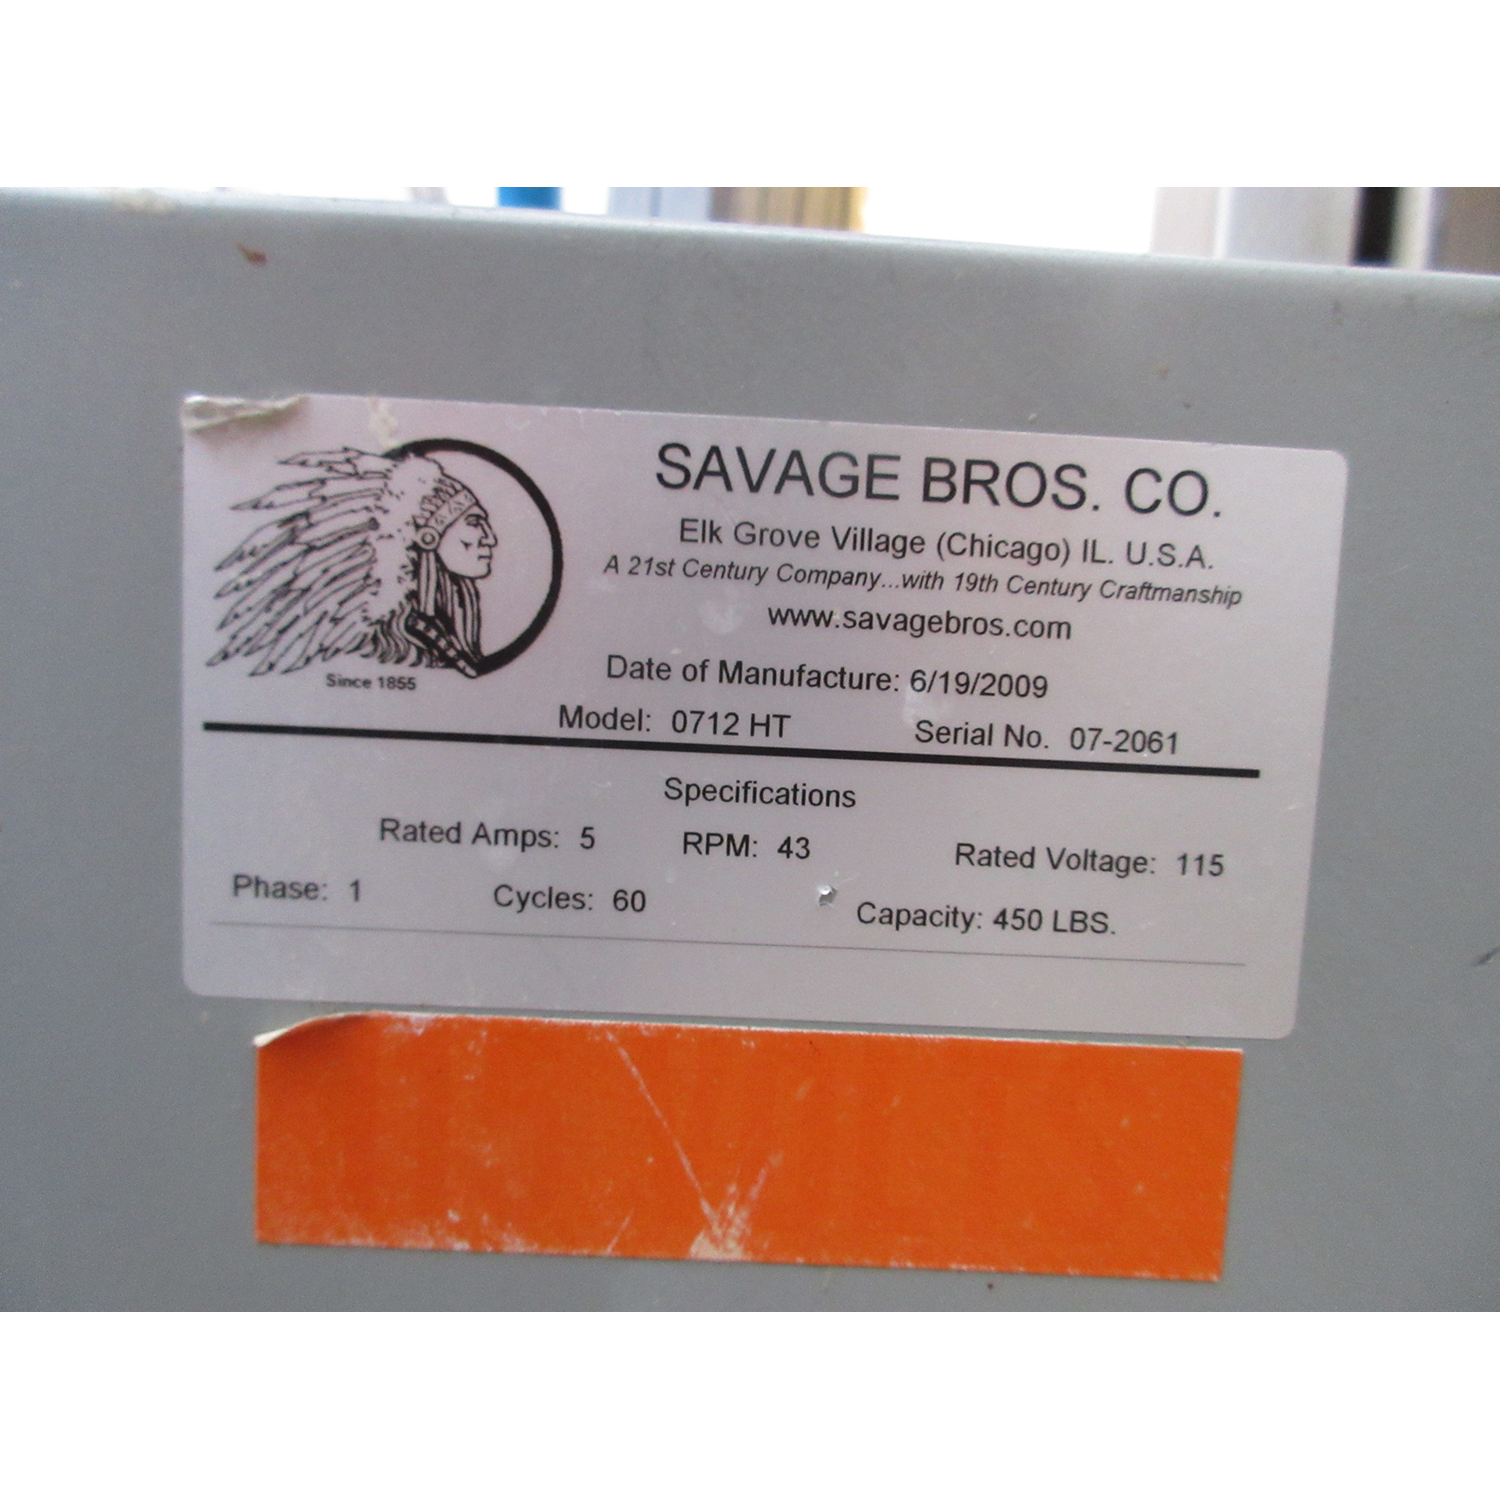 Savage Bros 0712HT Mixer Bowl Lifter, Used Excellent Condition image 5